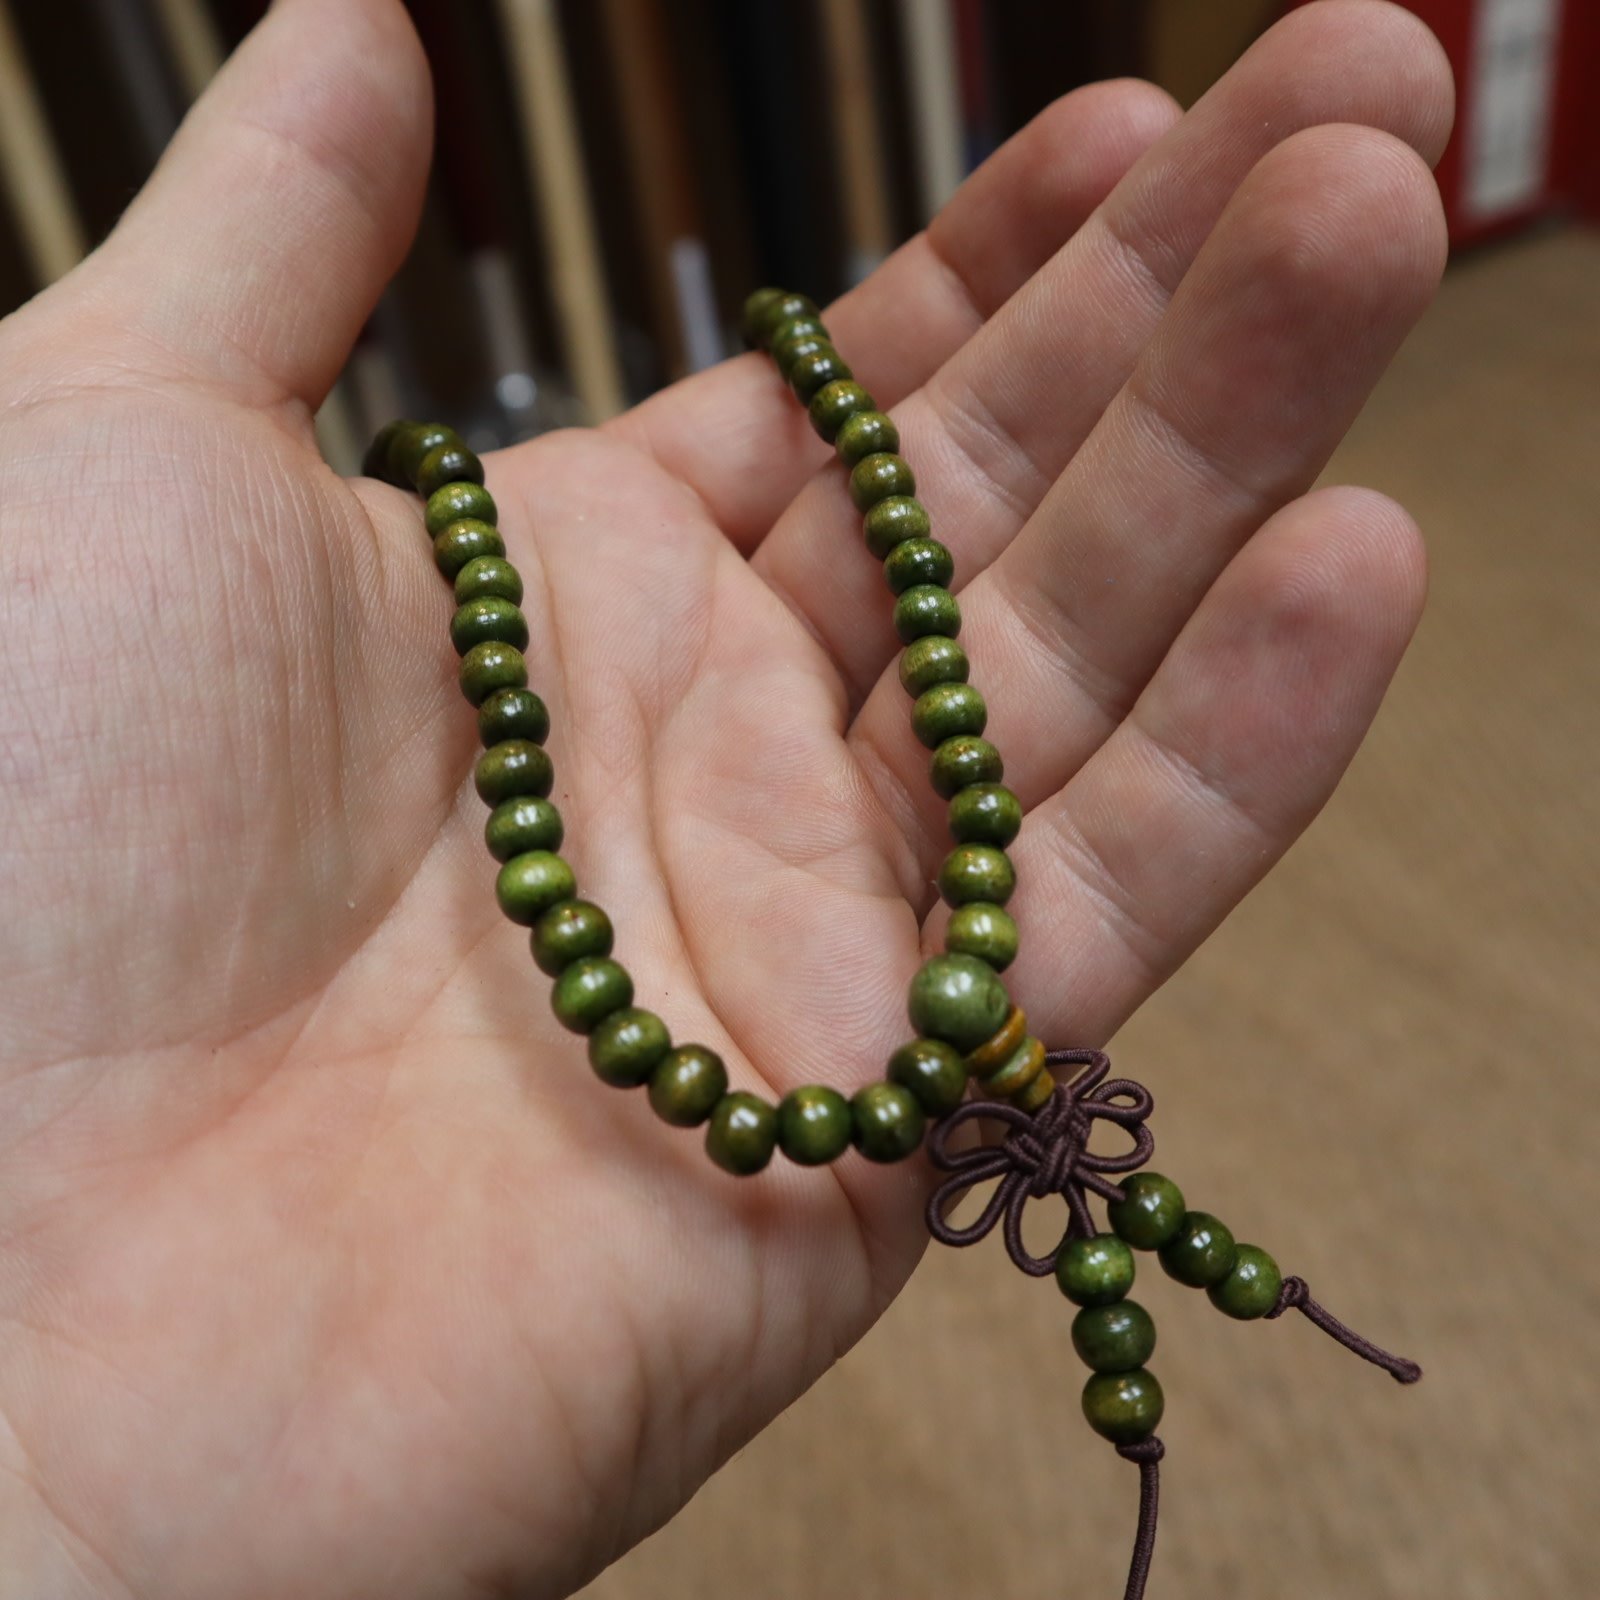 Shaolin Buddhist Monk Prayer Beads Necklace for Robes Kung fu  Uniforms,Shaolin beads